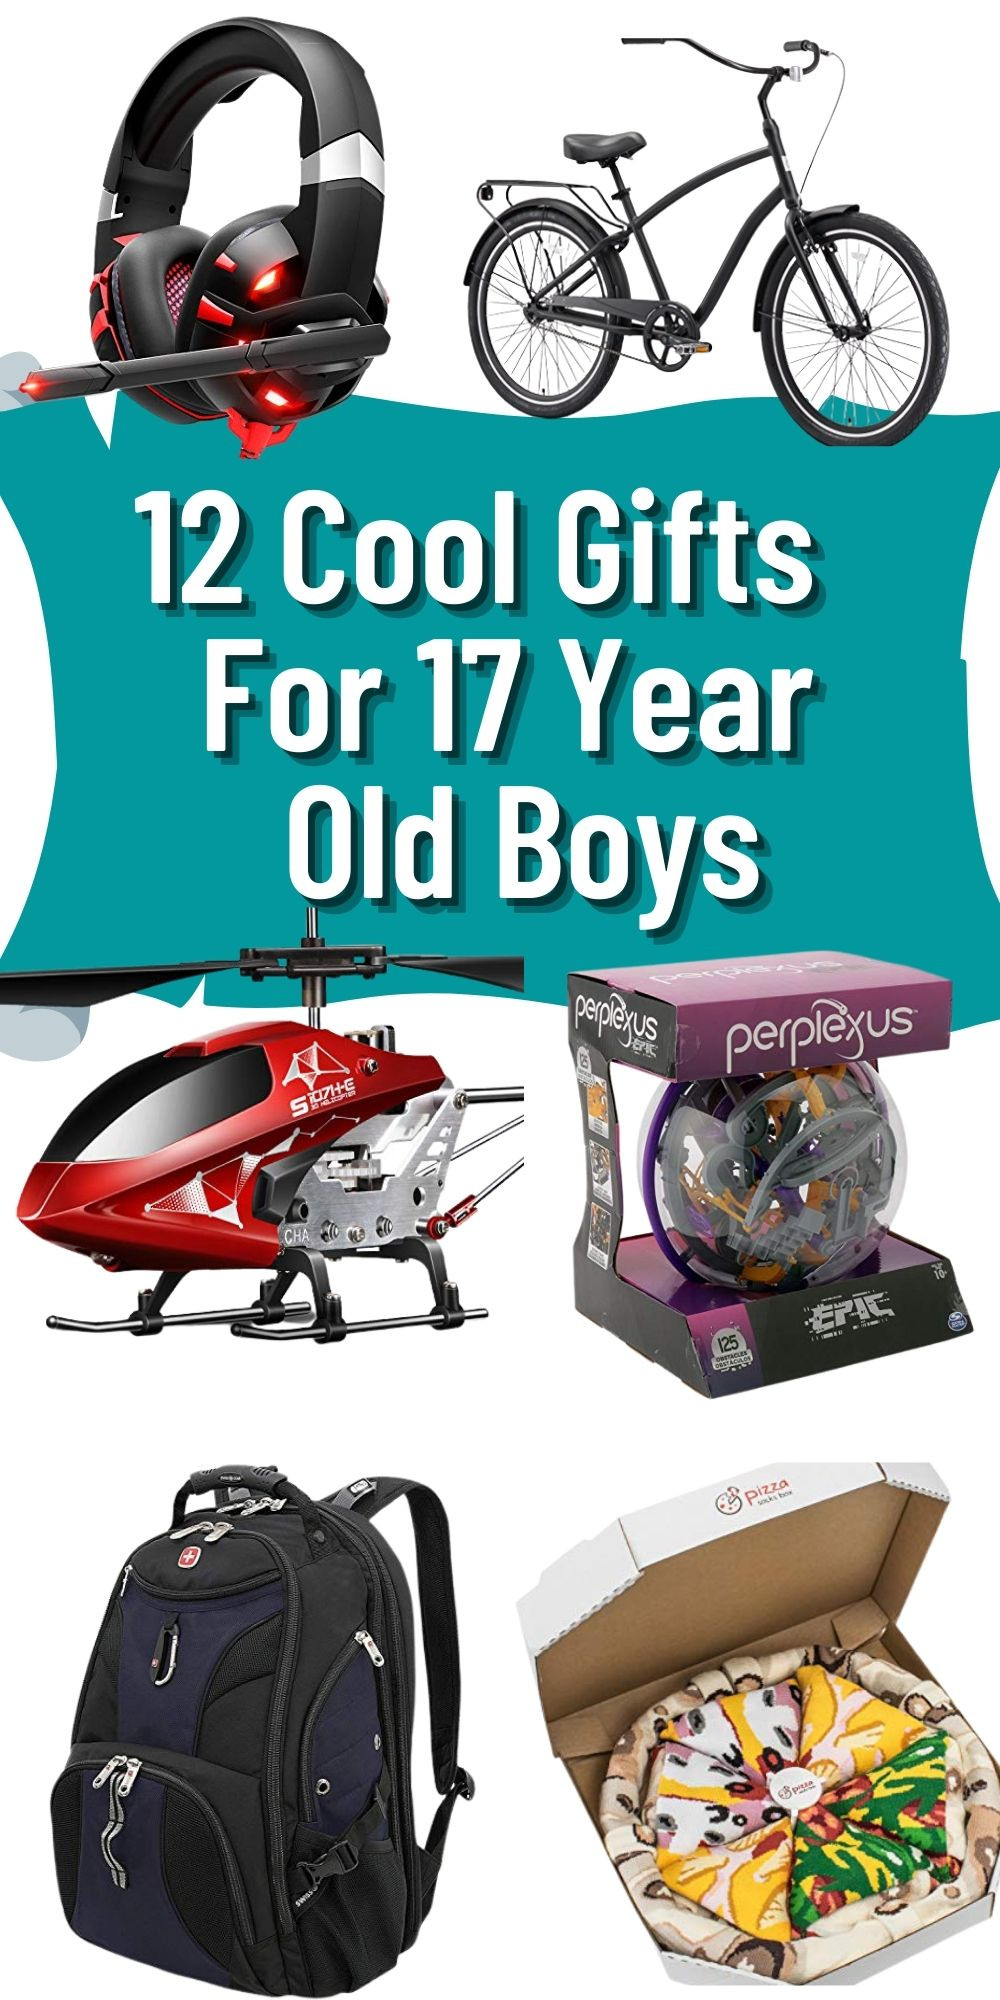 Gift Ideas For 17 Year Old Boys
 12 Super Cool Gift Ideas for 17 Year Old Boys